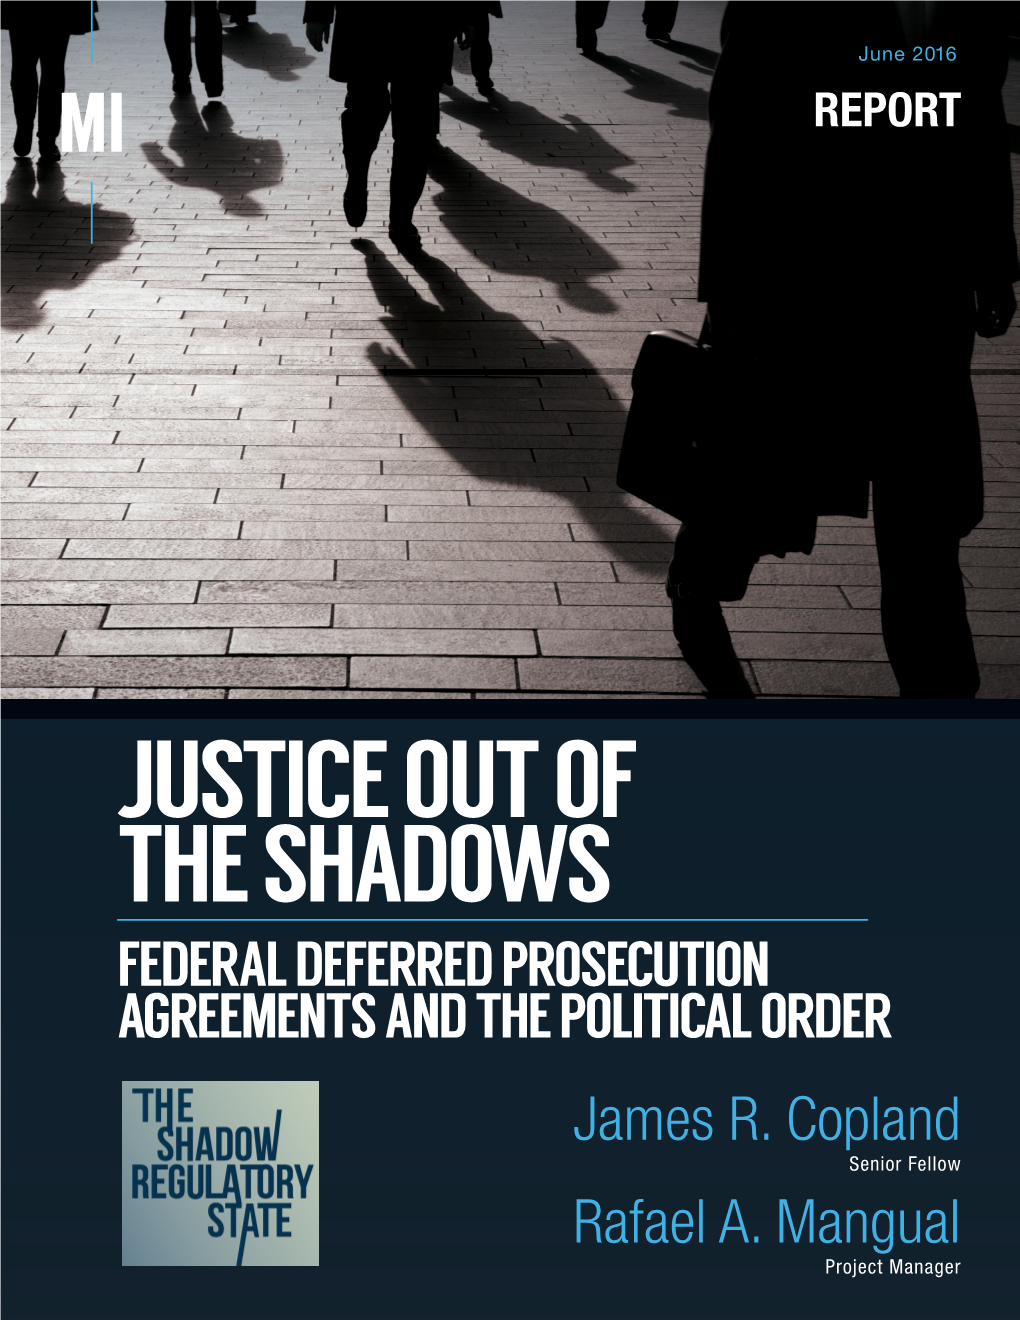 Justice out of the Shadows | Federal Deferred Prosecution Agreements and the Political Order June 2016 REPORT